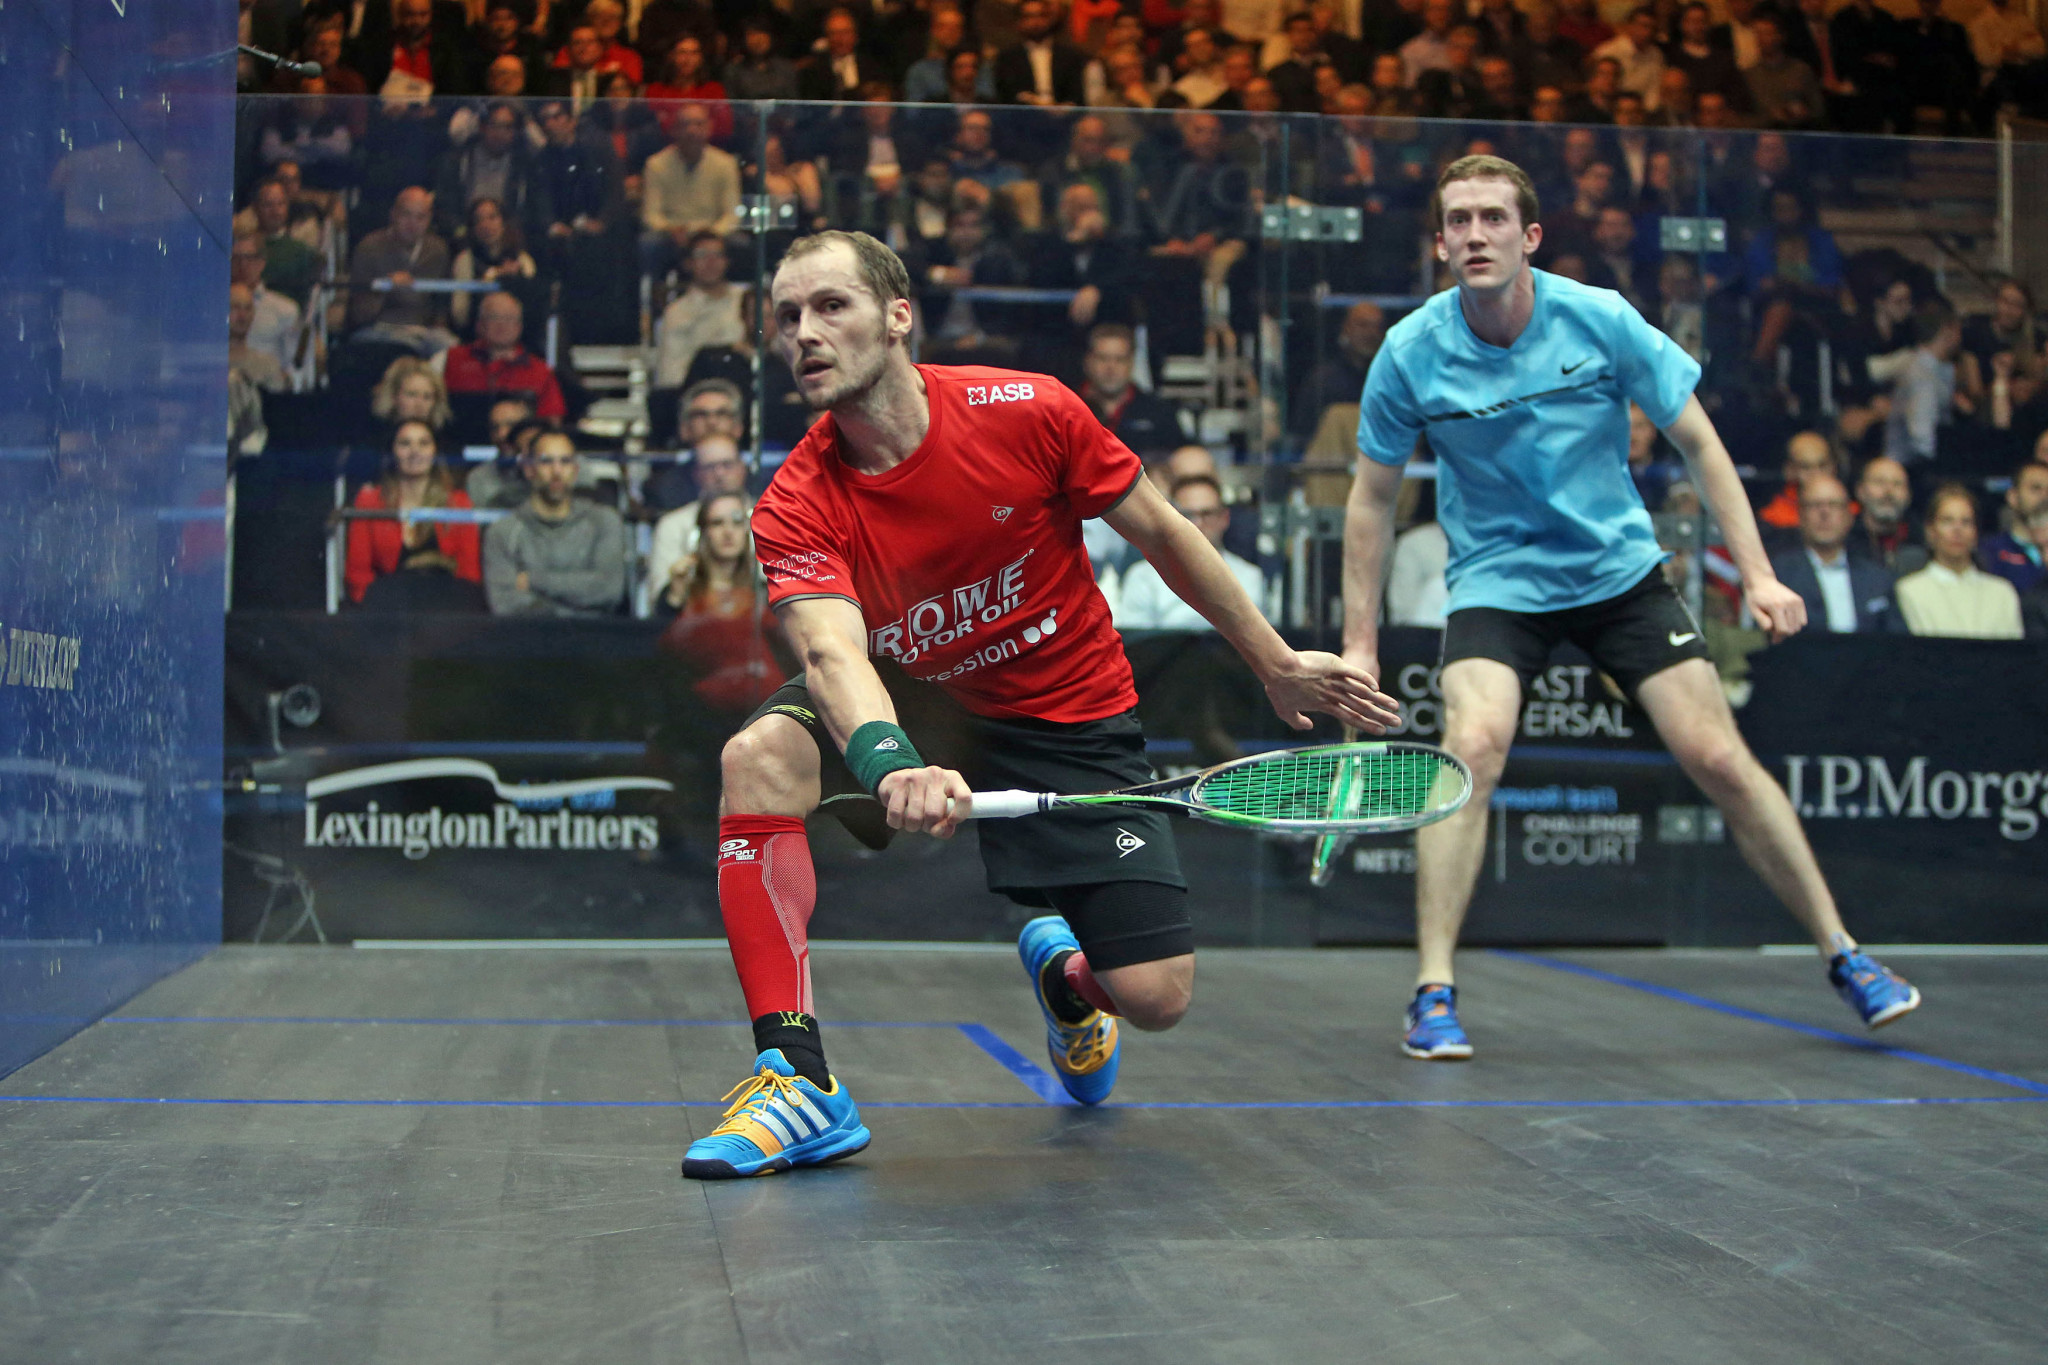 World number one Gregory Gaultier safely progressed to the second round ©PSA